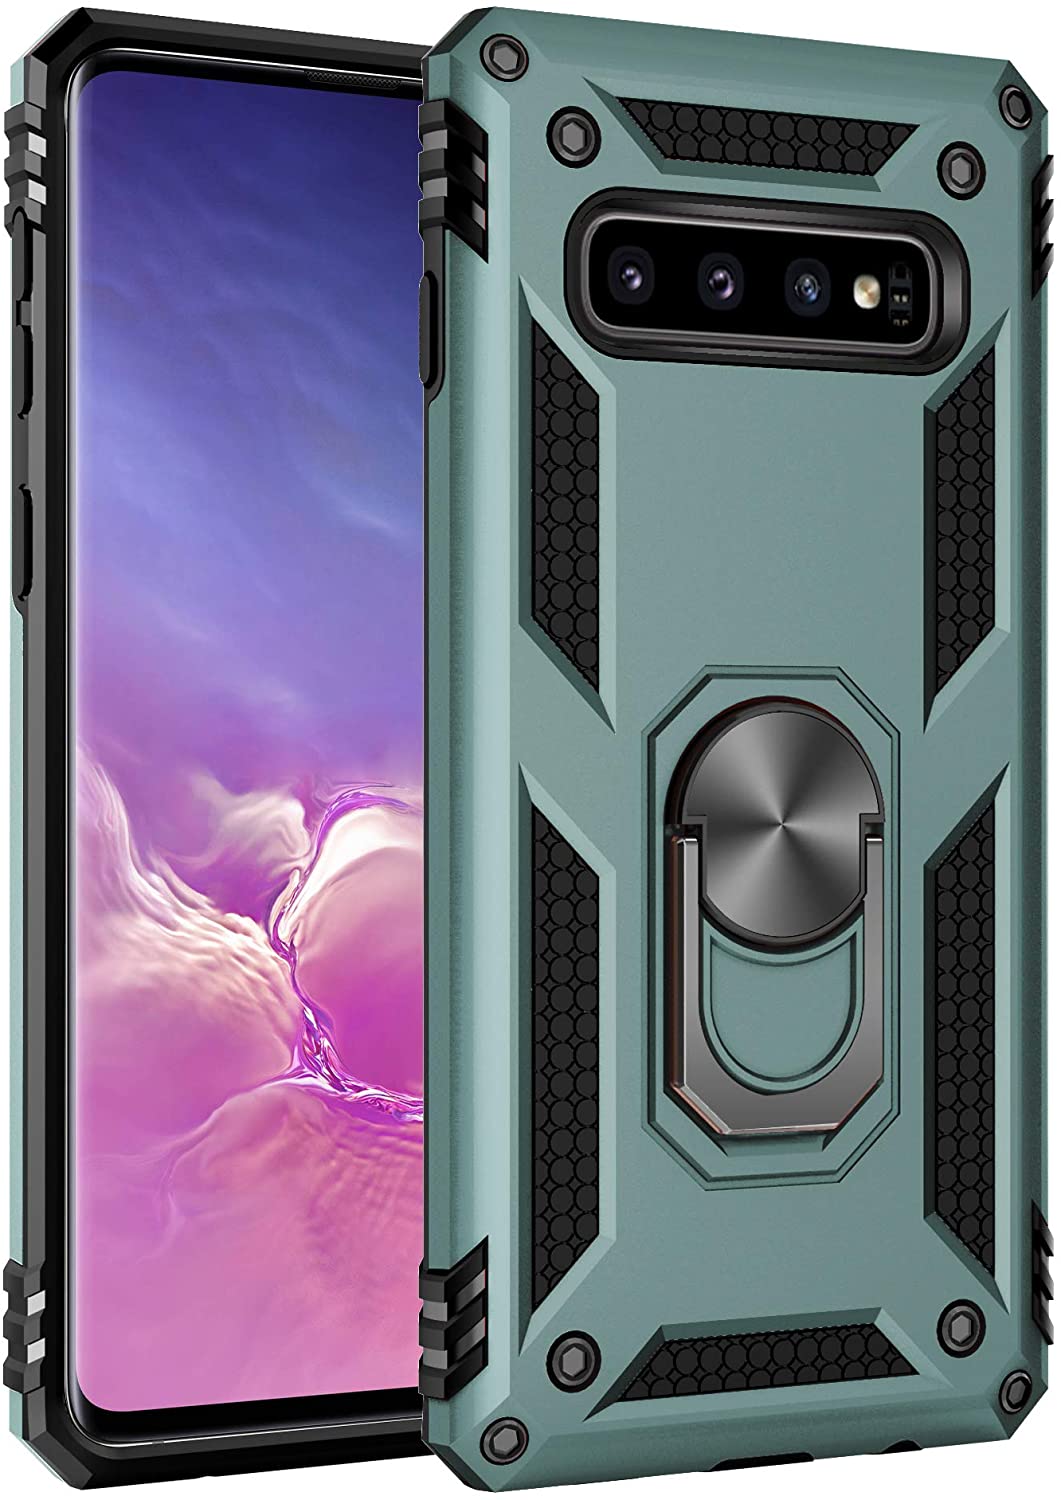 Samsung Galaxy S10 Plus Case,Military Armor 360 Unbreakable Swivel Ring Kickstand - Grey Green - e4cents